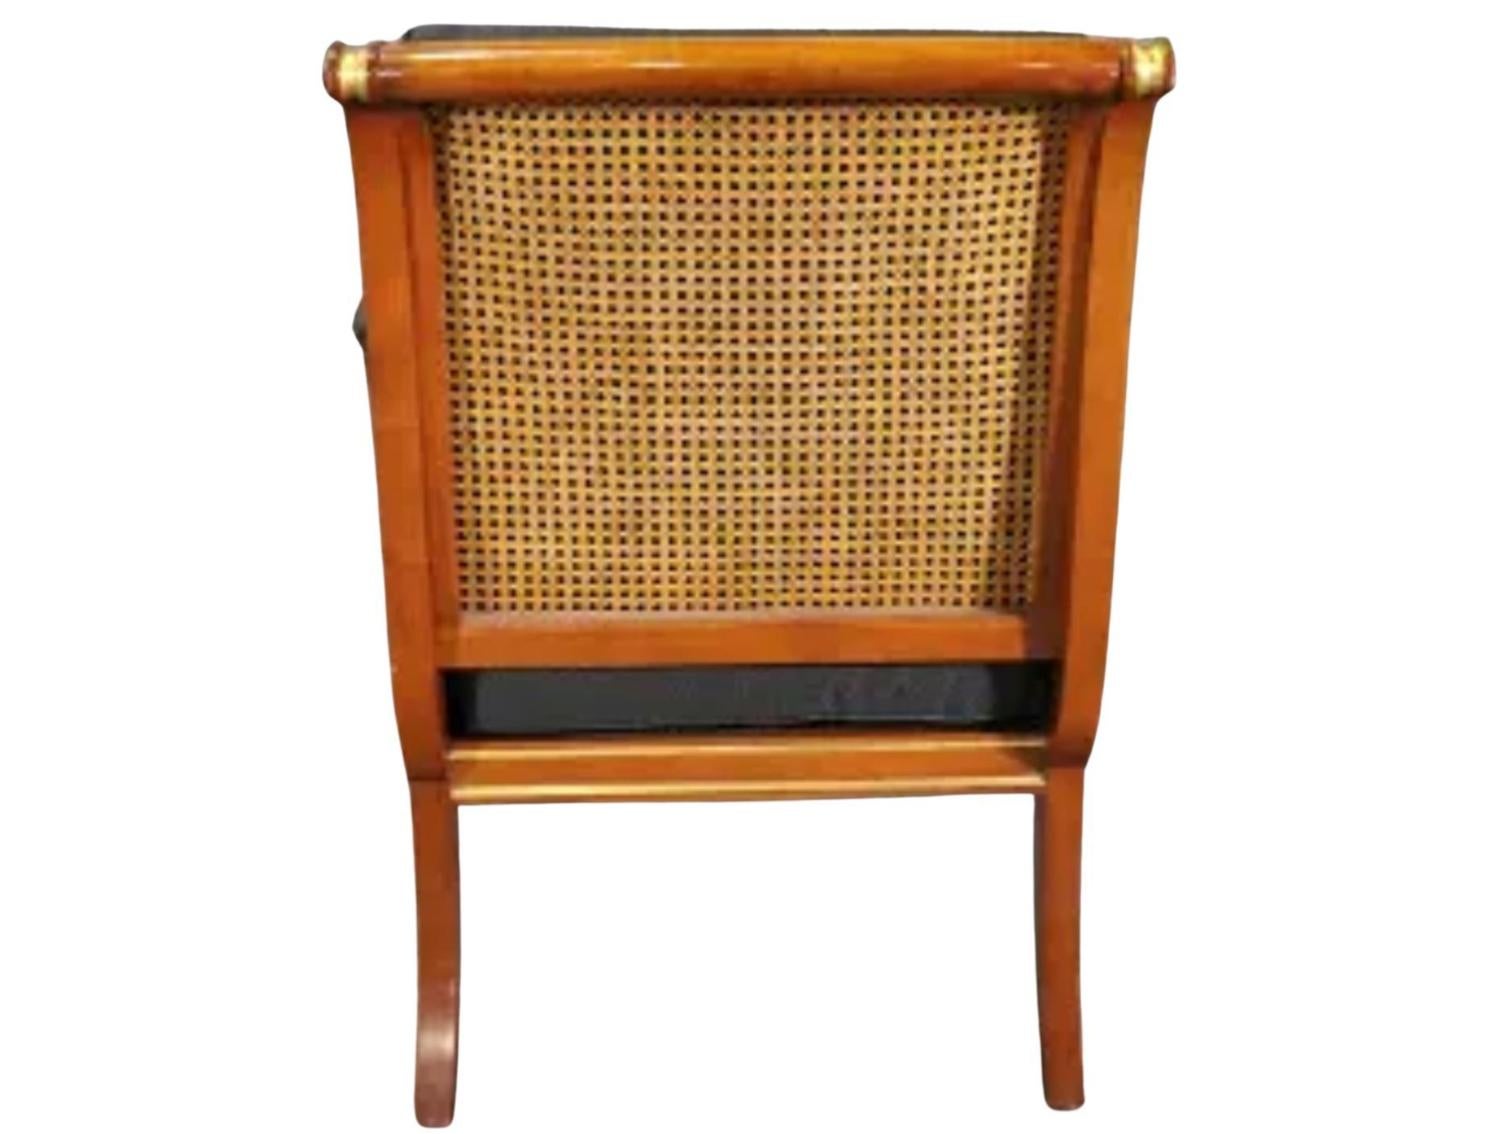 British 19th C Style Regency Mahogany & Cane Giltwood Bergere Armchair For Sale